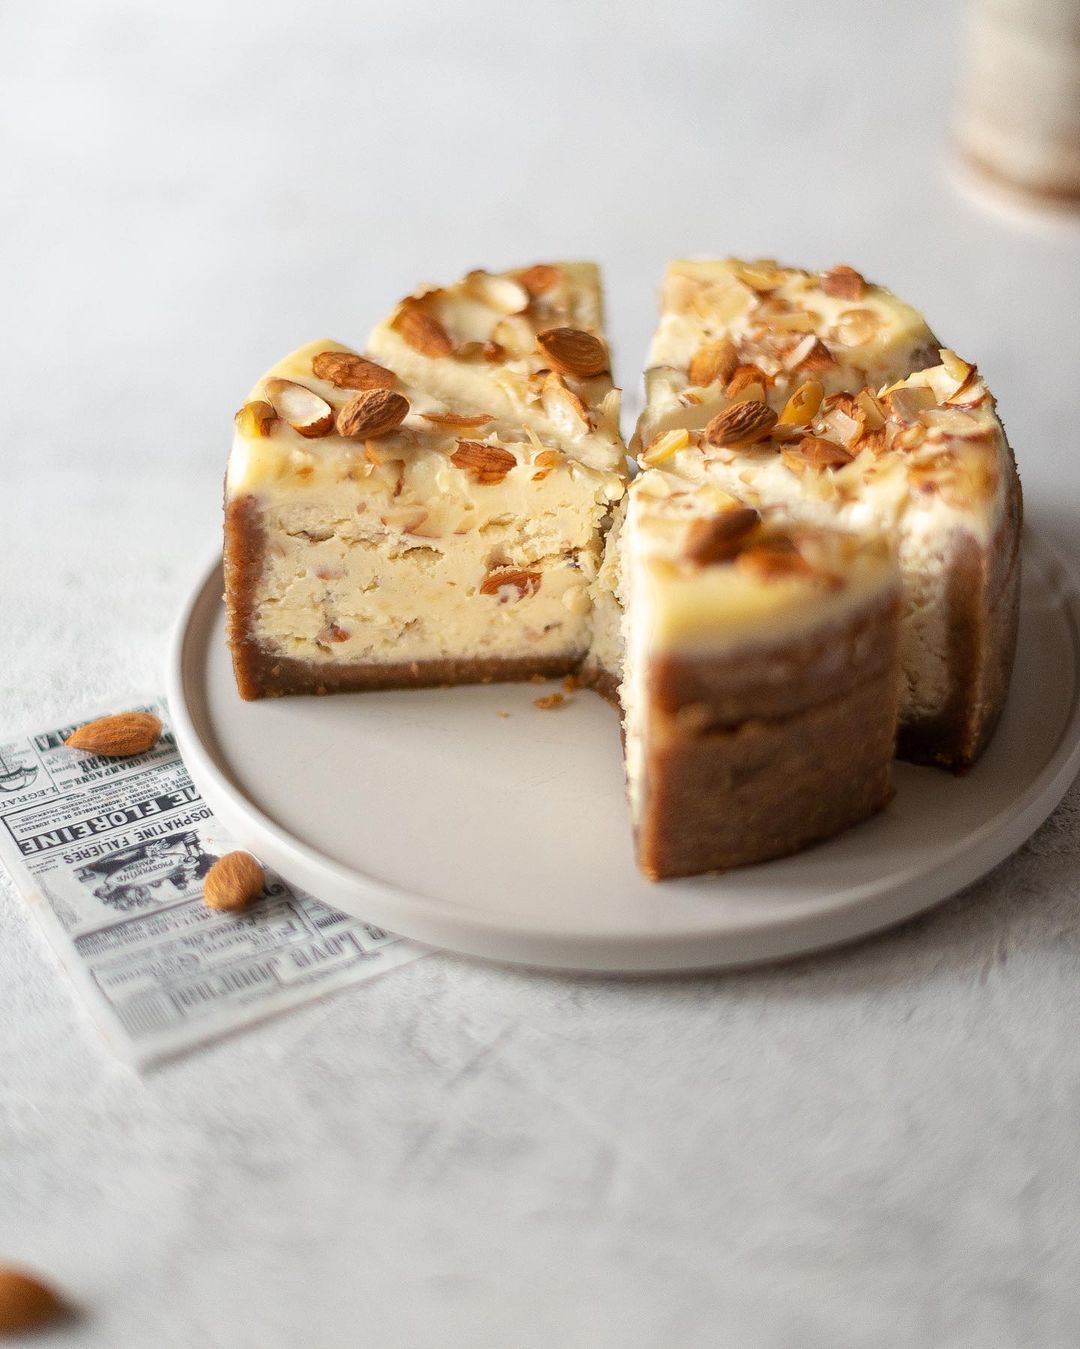 ALMOND CHEESECAKE WITH SOUR CREAM FILLING